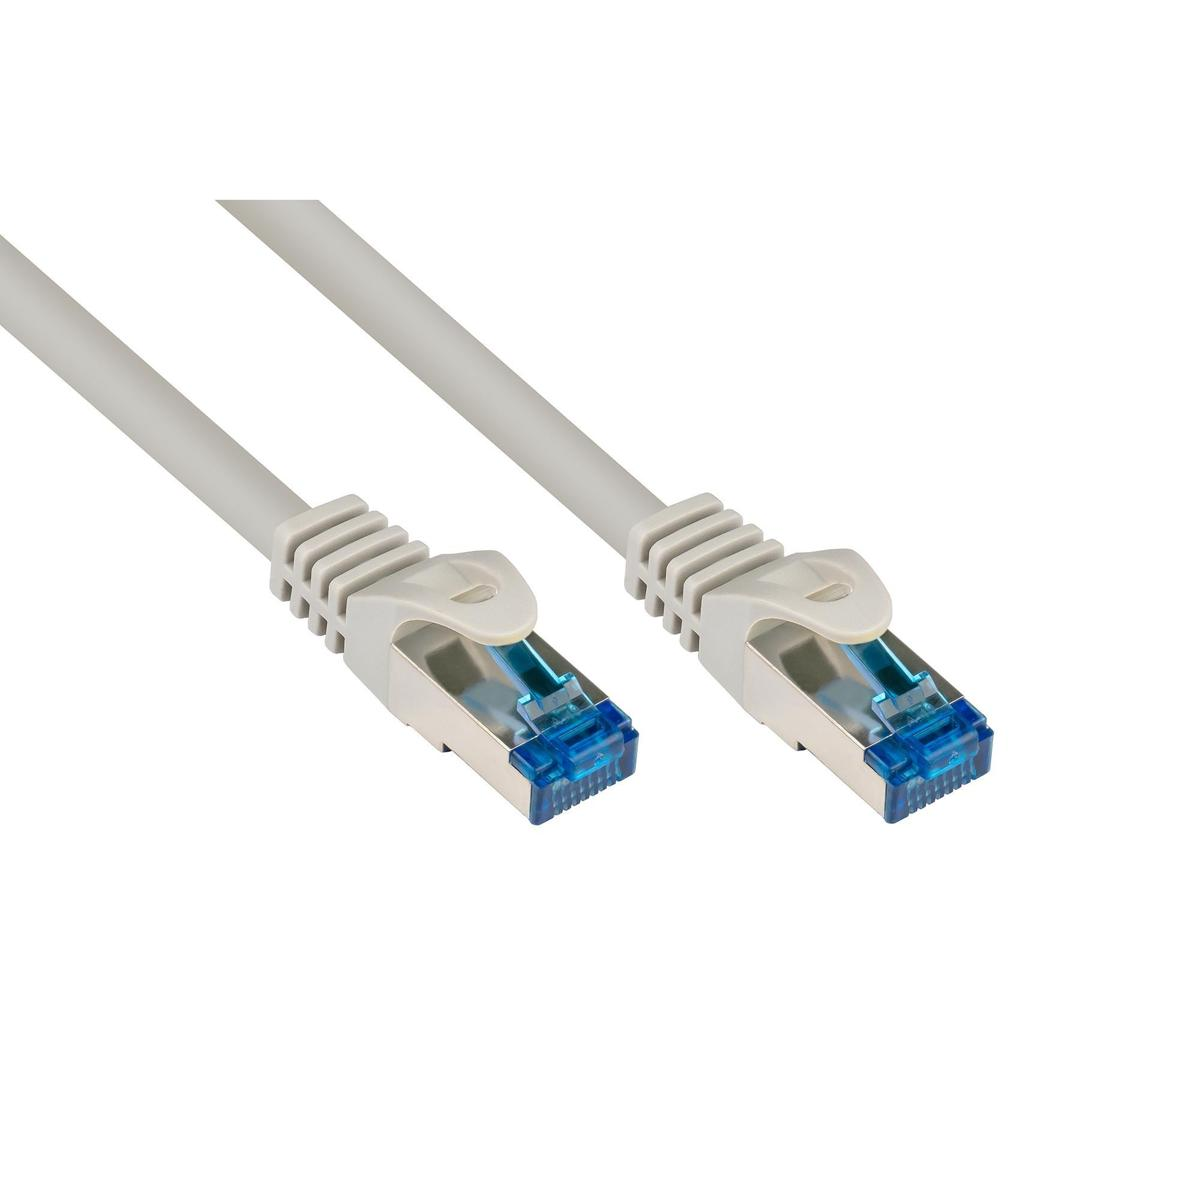 VARIA GROUP 8060-SF250 Cat.6a, Grau Patchcable